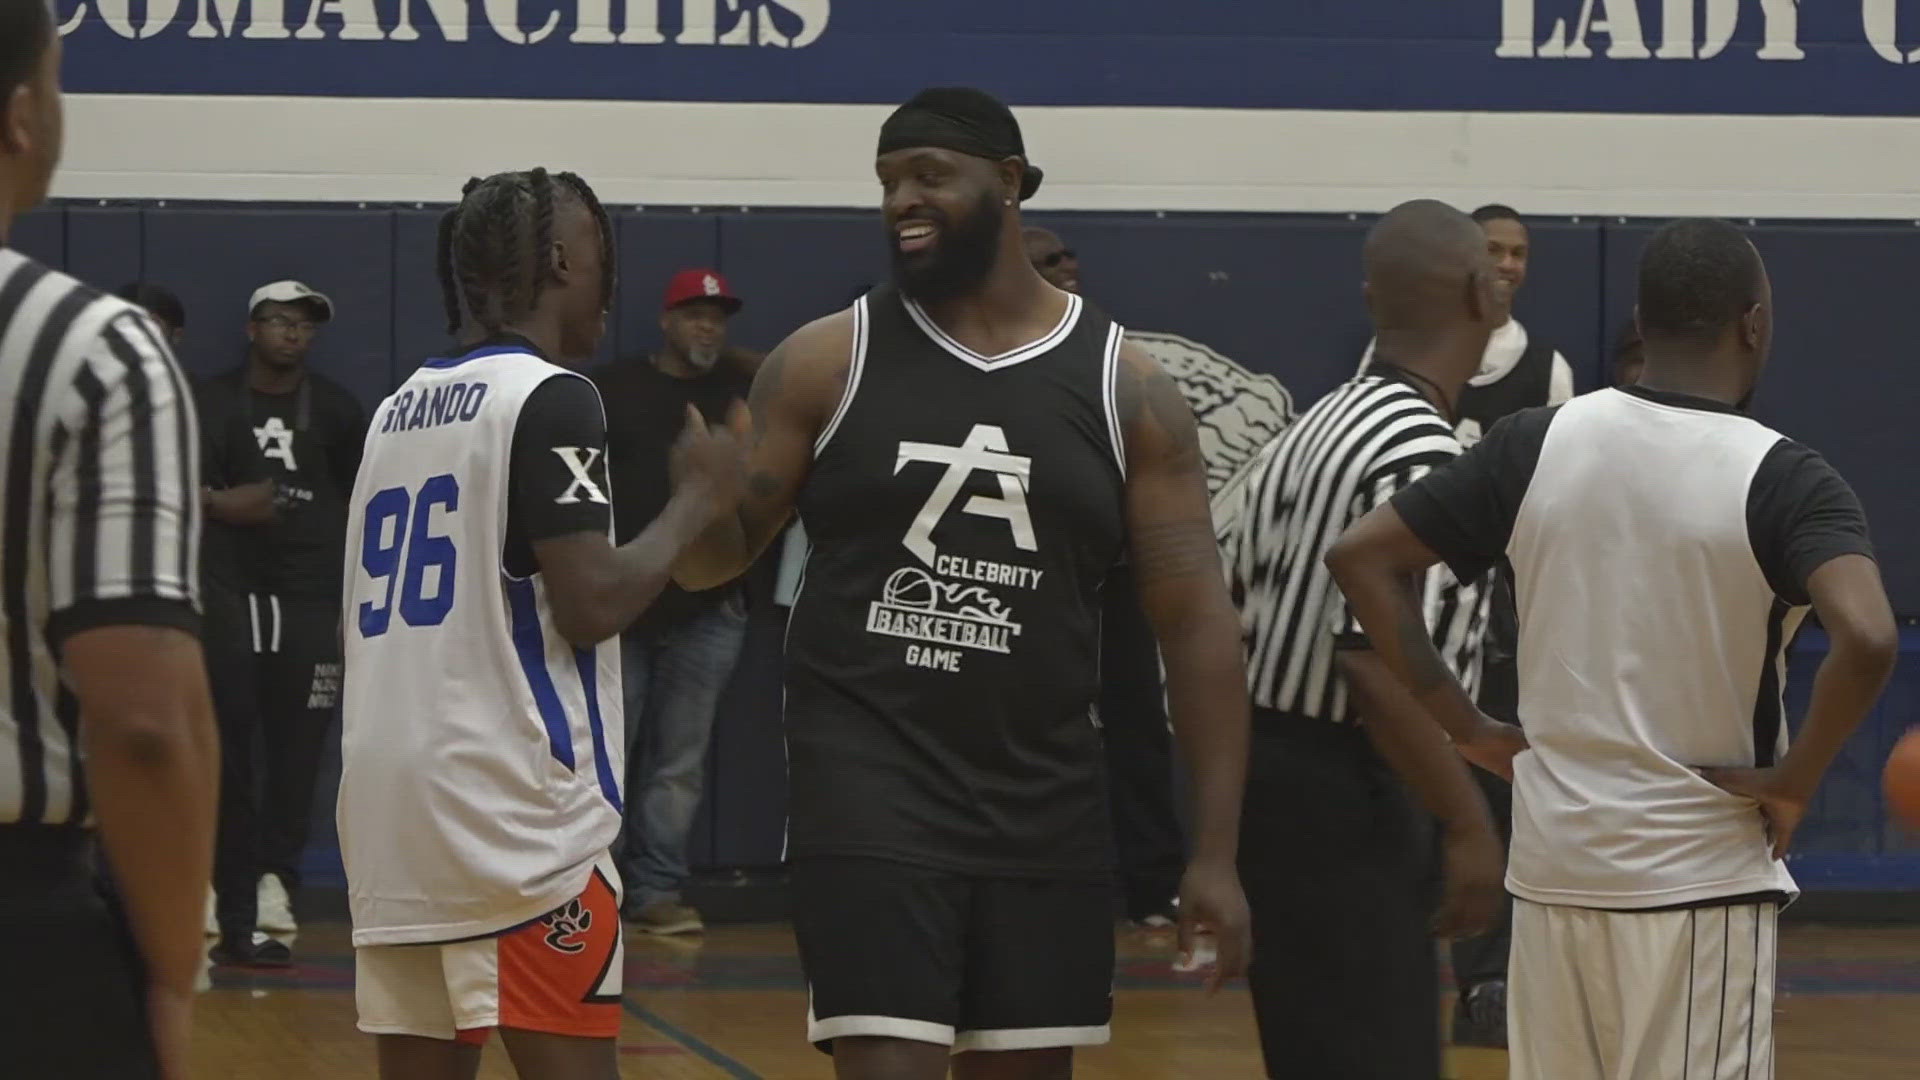 Sometimes it's good to not stay in your lane. That's what we saw tonight in Cahokia Heights as some NFL stars traded in their cleats for kicks on the court.